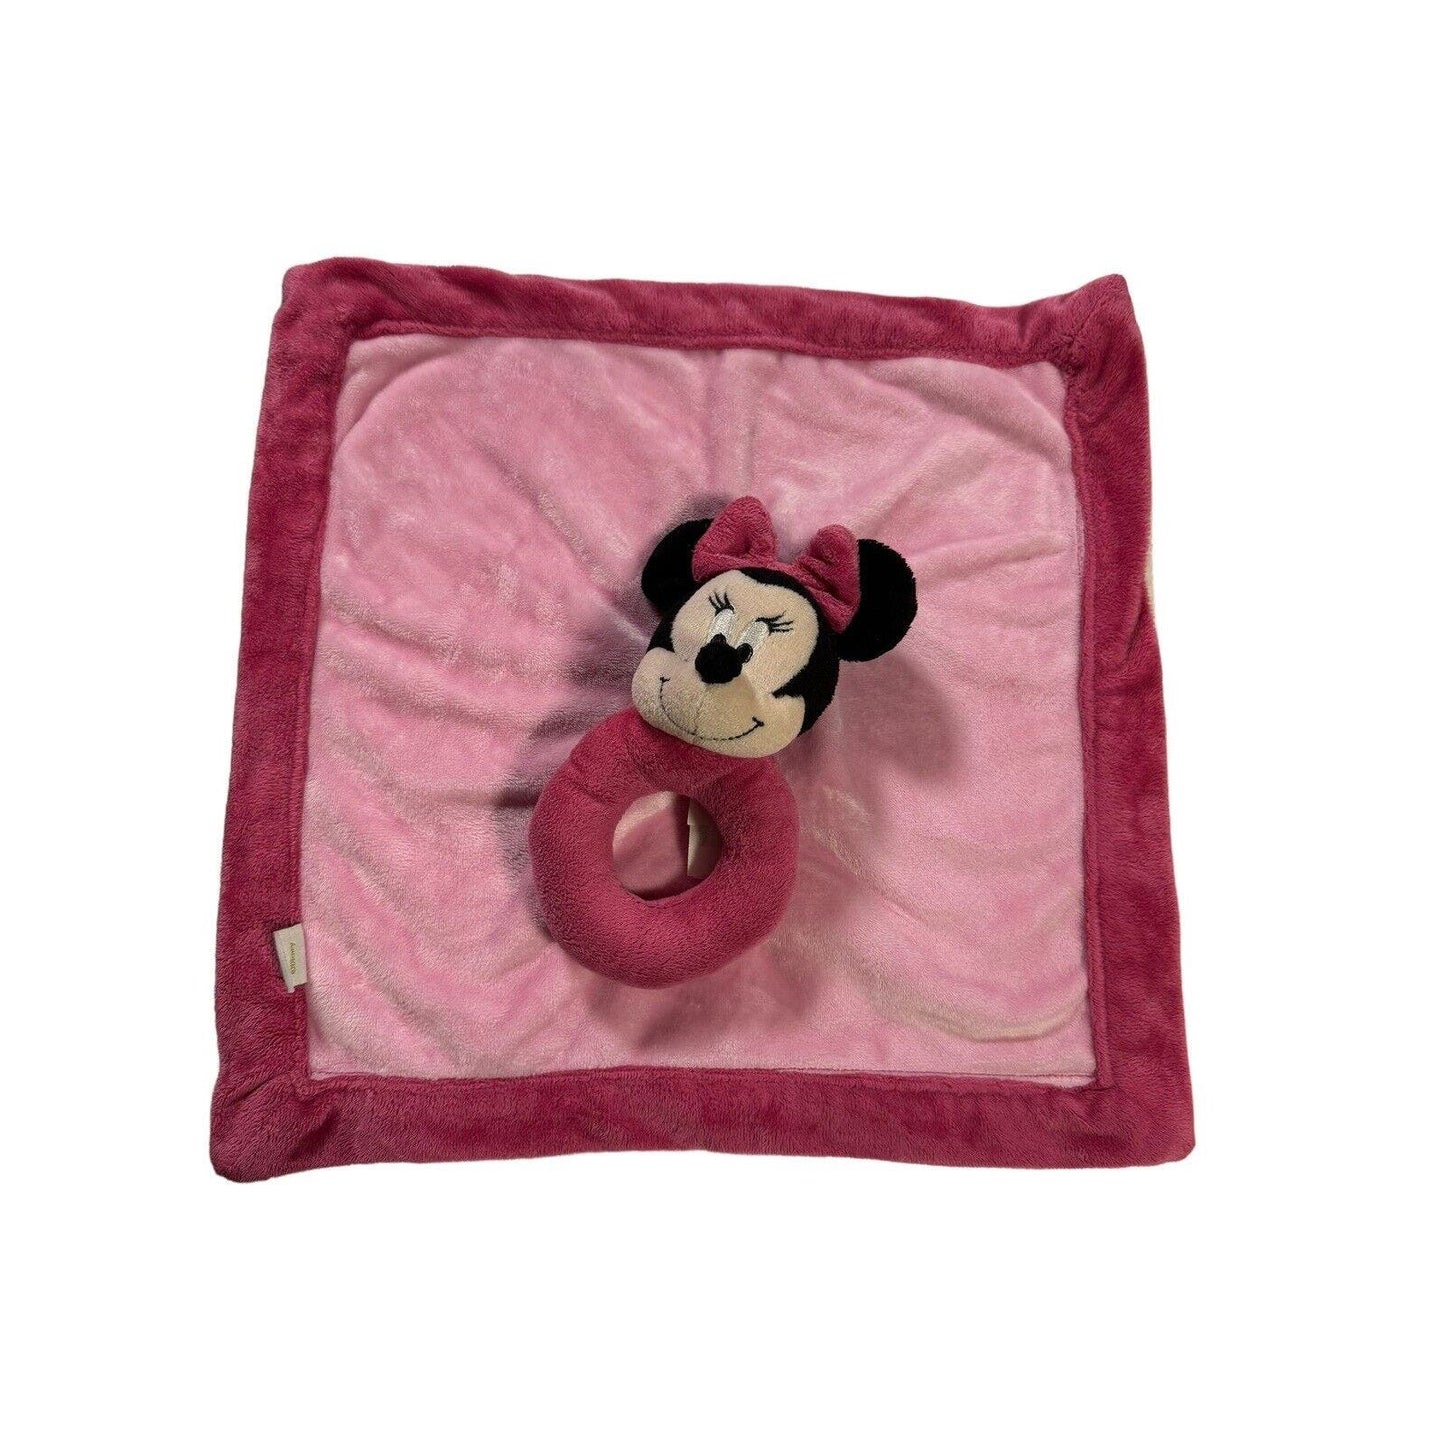 Disney Baby Minnie Mouse Security Blanket with Ring Rattle Lovey Pink 13x13